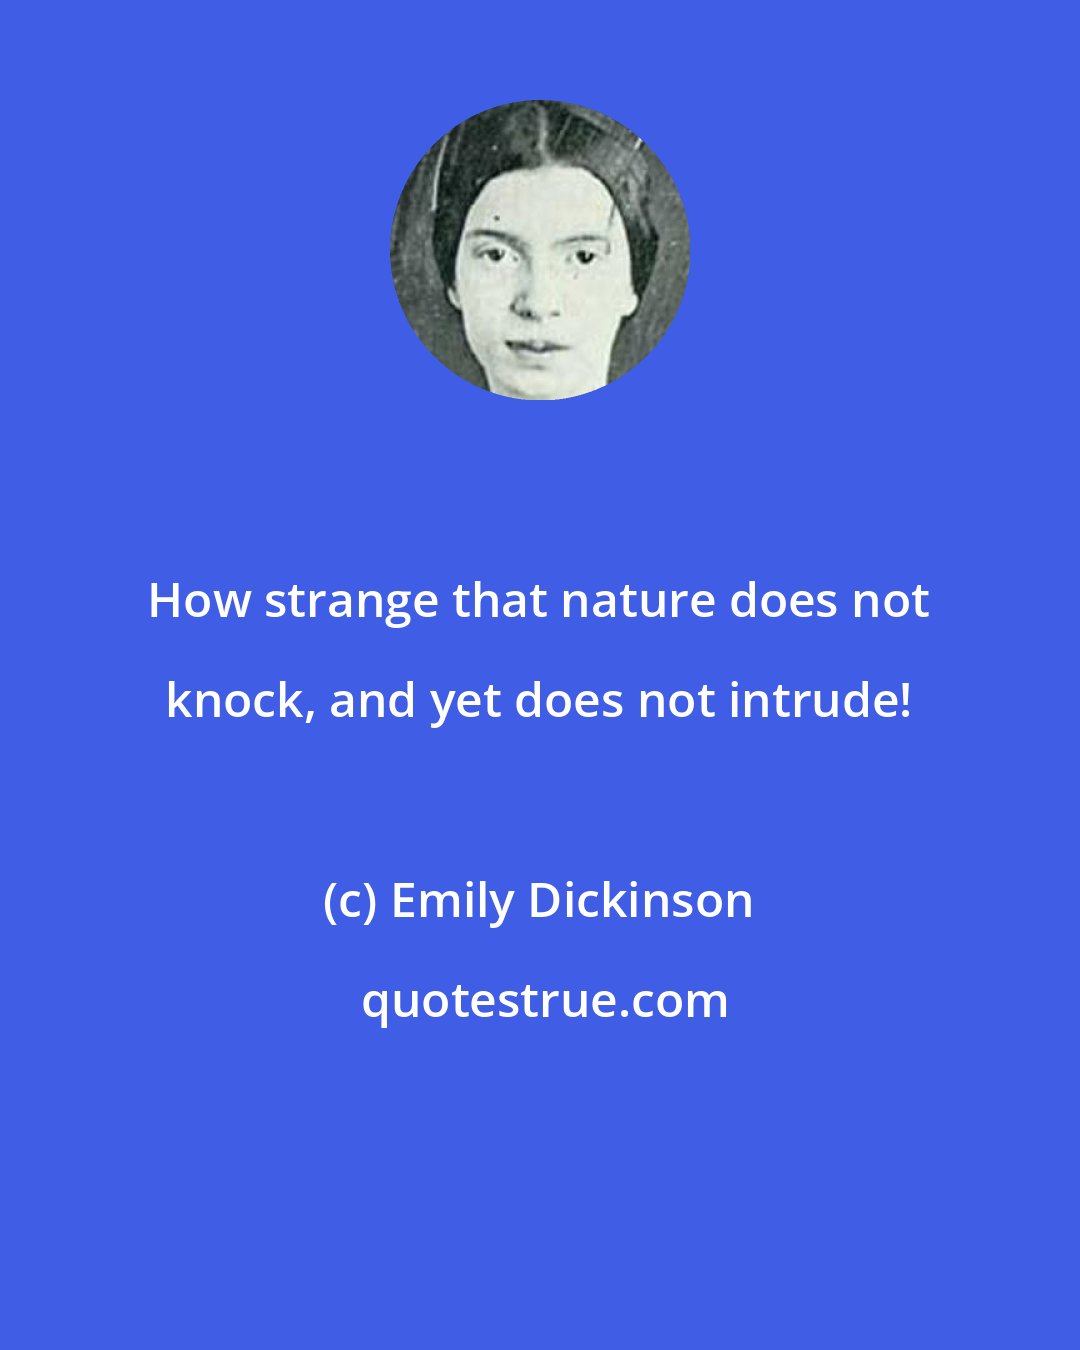 Emily Dickinson: How strange that nature does not knock, and yet does not intrude!